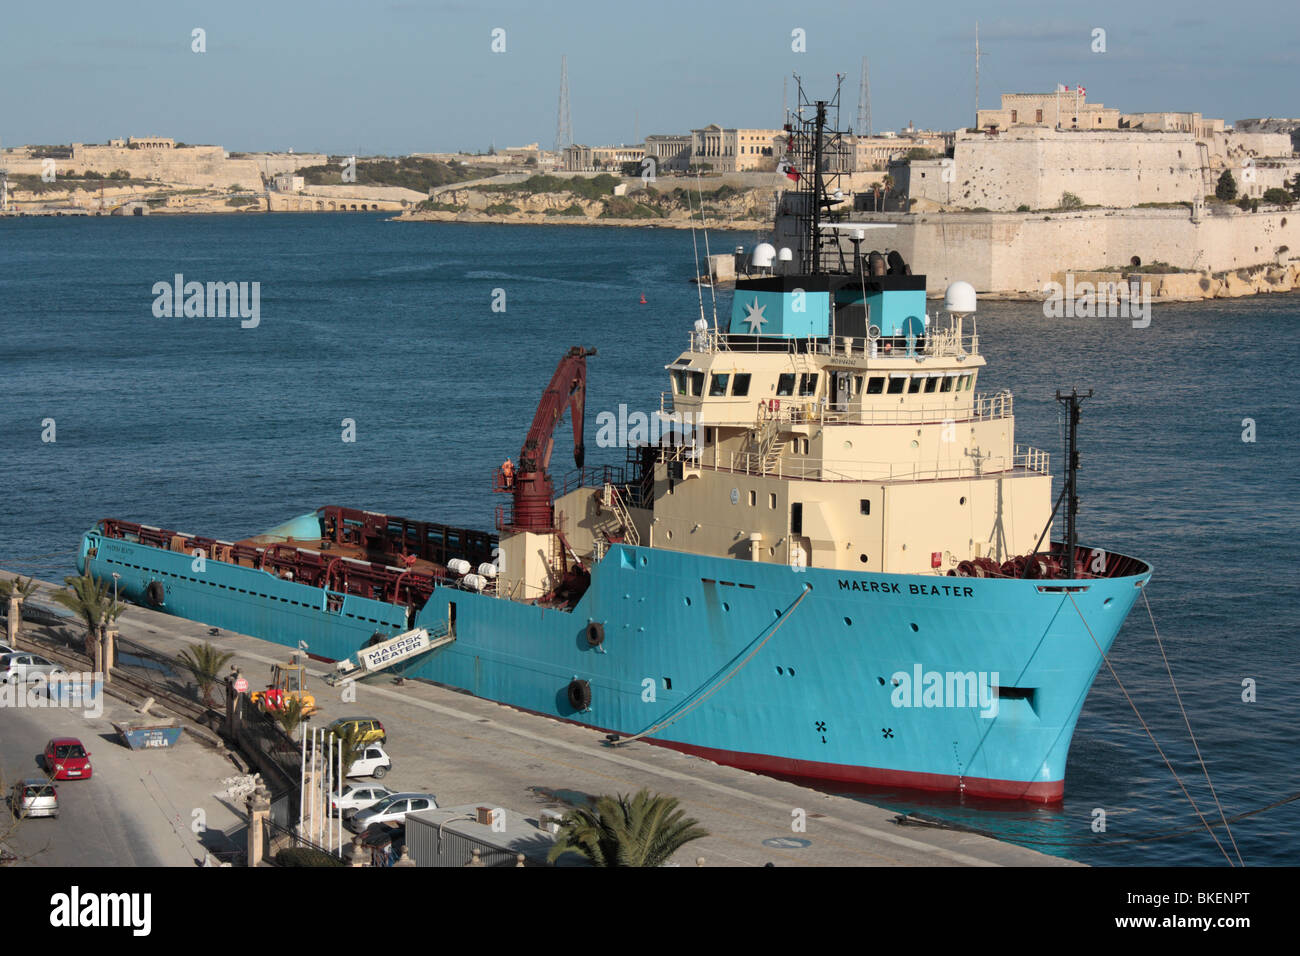 The tug and supply vessel Maersk Beater Stock Photo